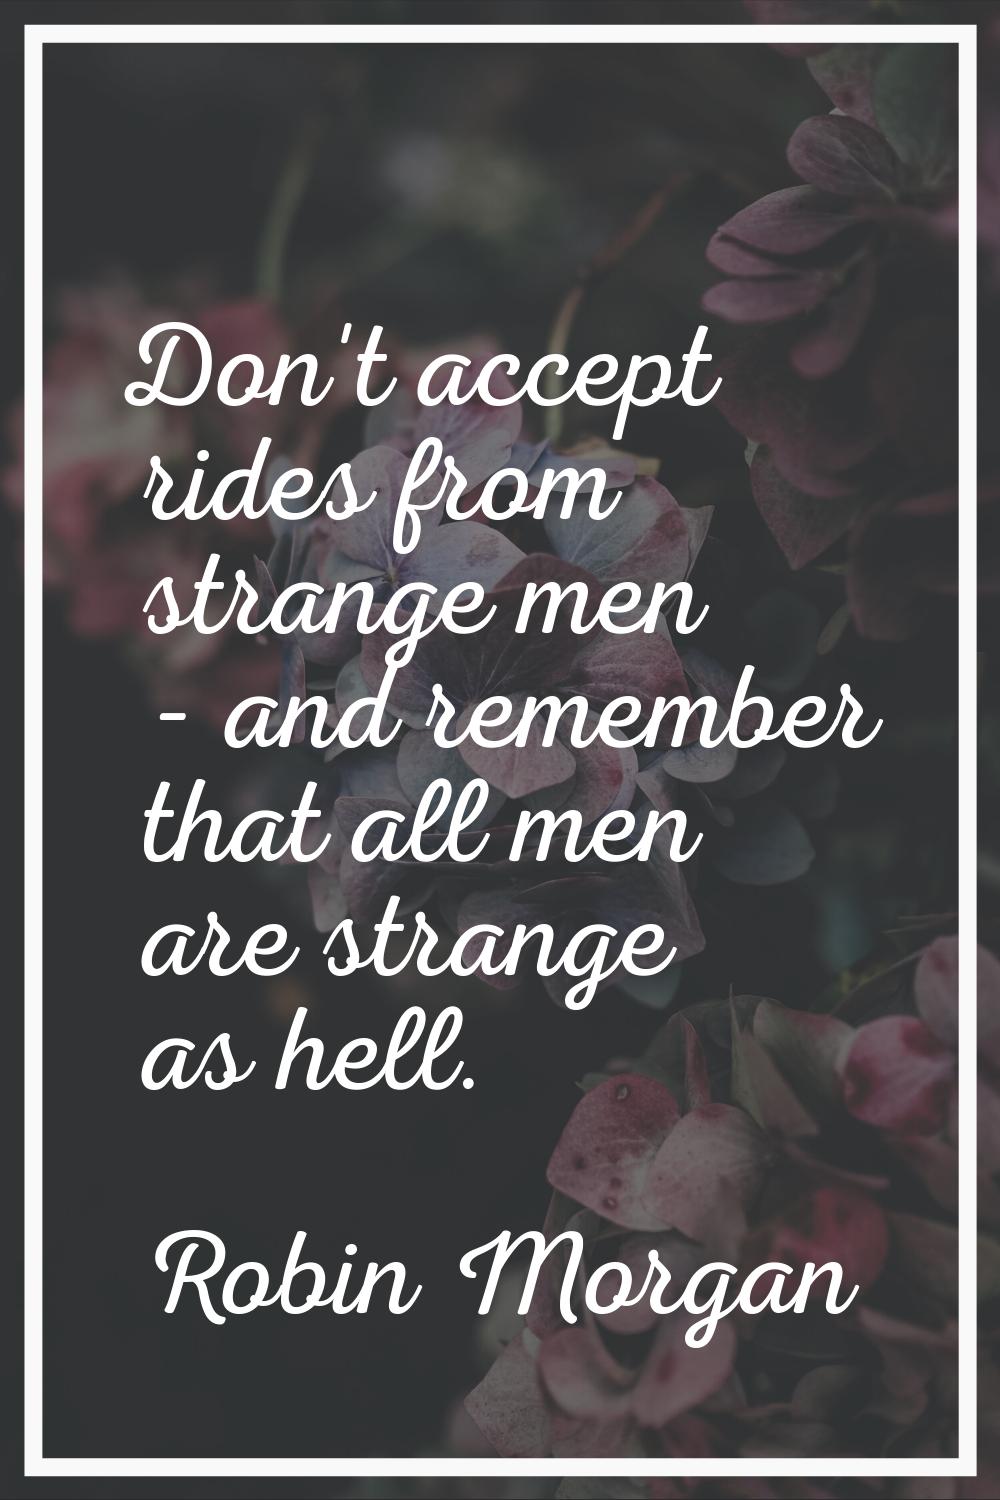 Don't accept rides from strange men - and remember that all men are strange as hell.